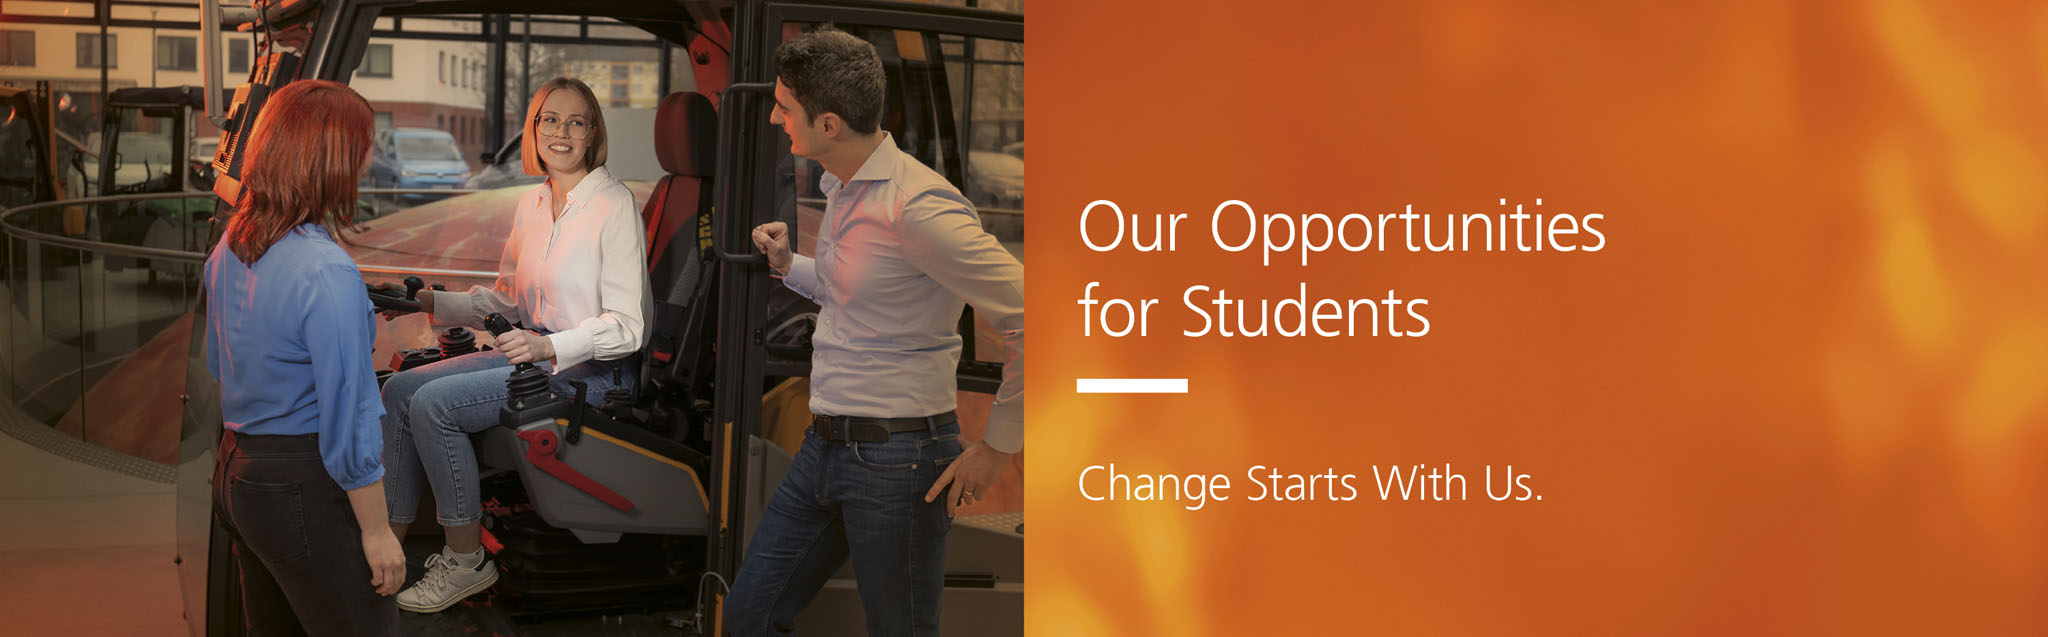 Our Opportunities for Students